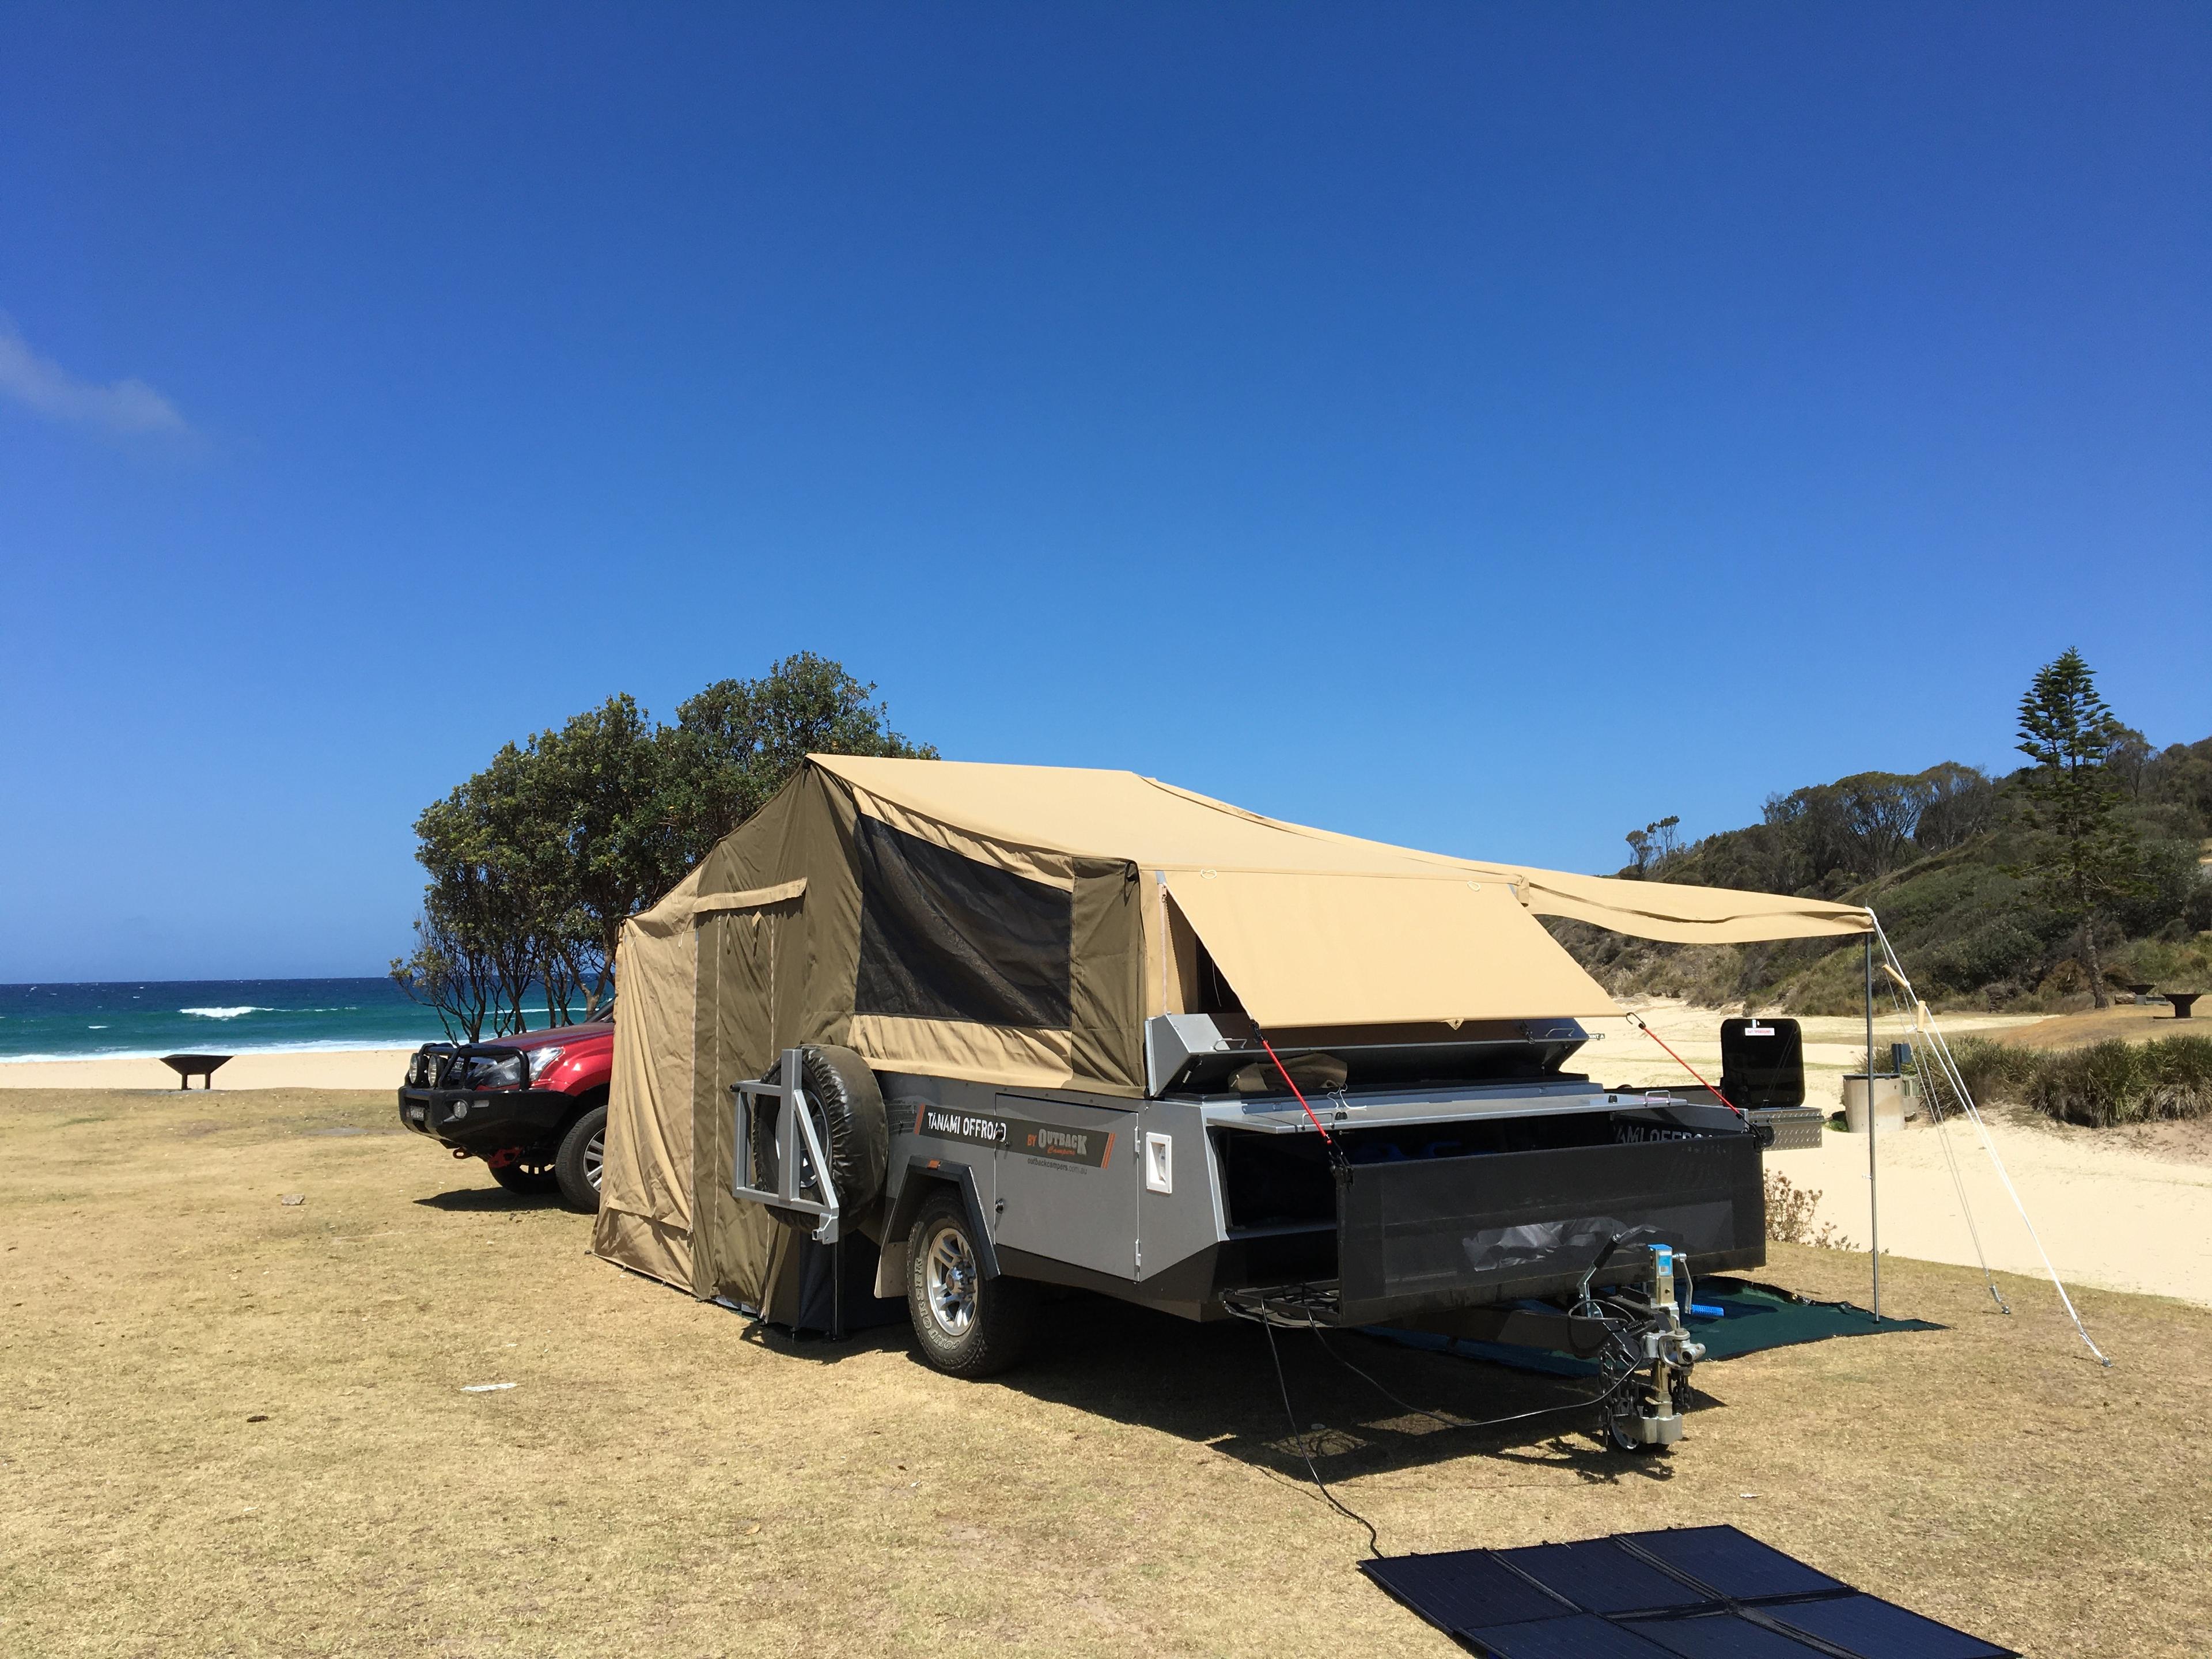 2019 OUTBACK CAMPERS Tanami